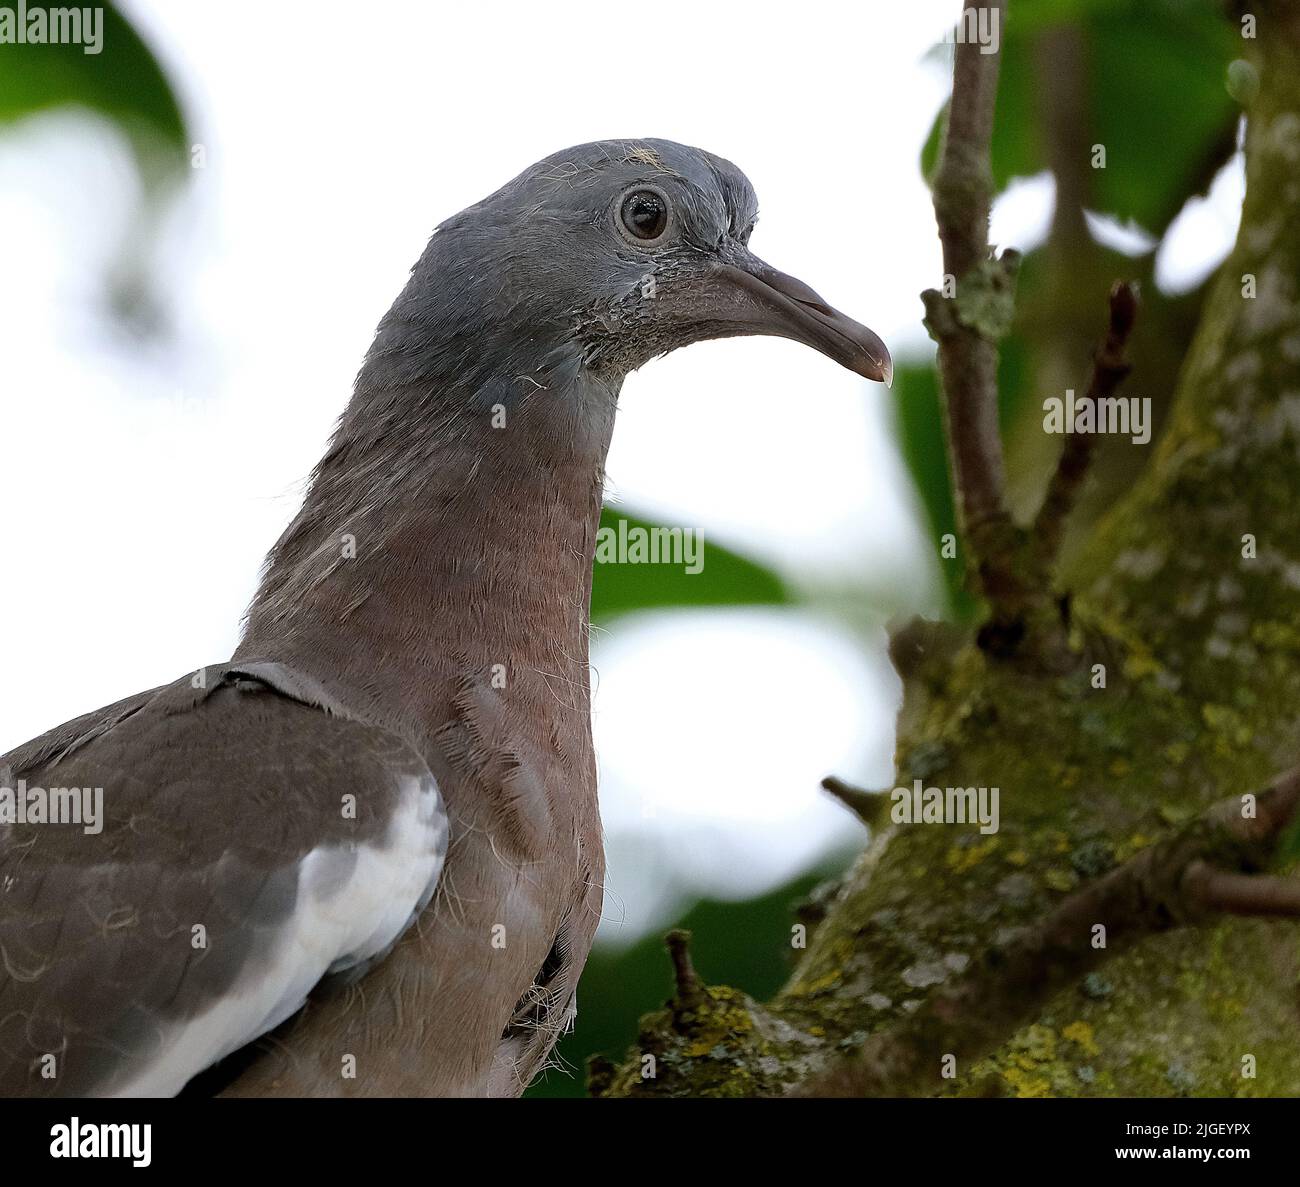 The common wood pigeon or common woodpigeon, also known as simply wood pigeon or woodpigeon, is a large species in the dove and pigeon family. Stock Photo